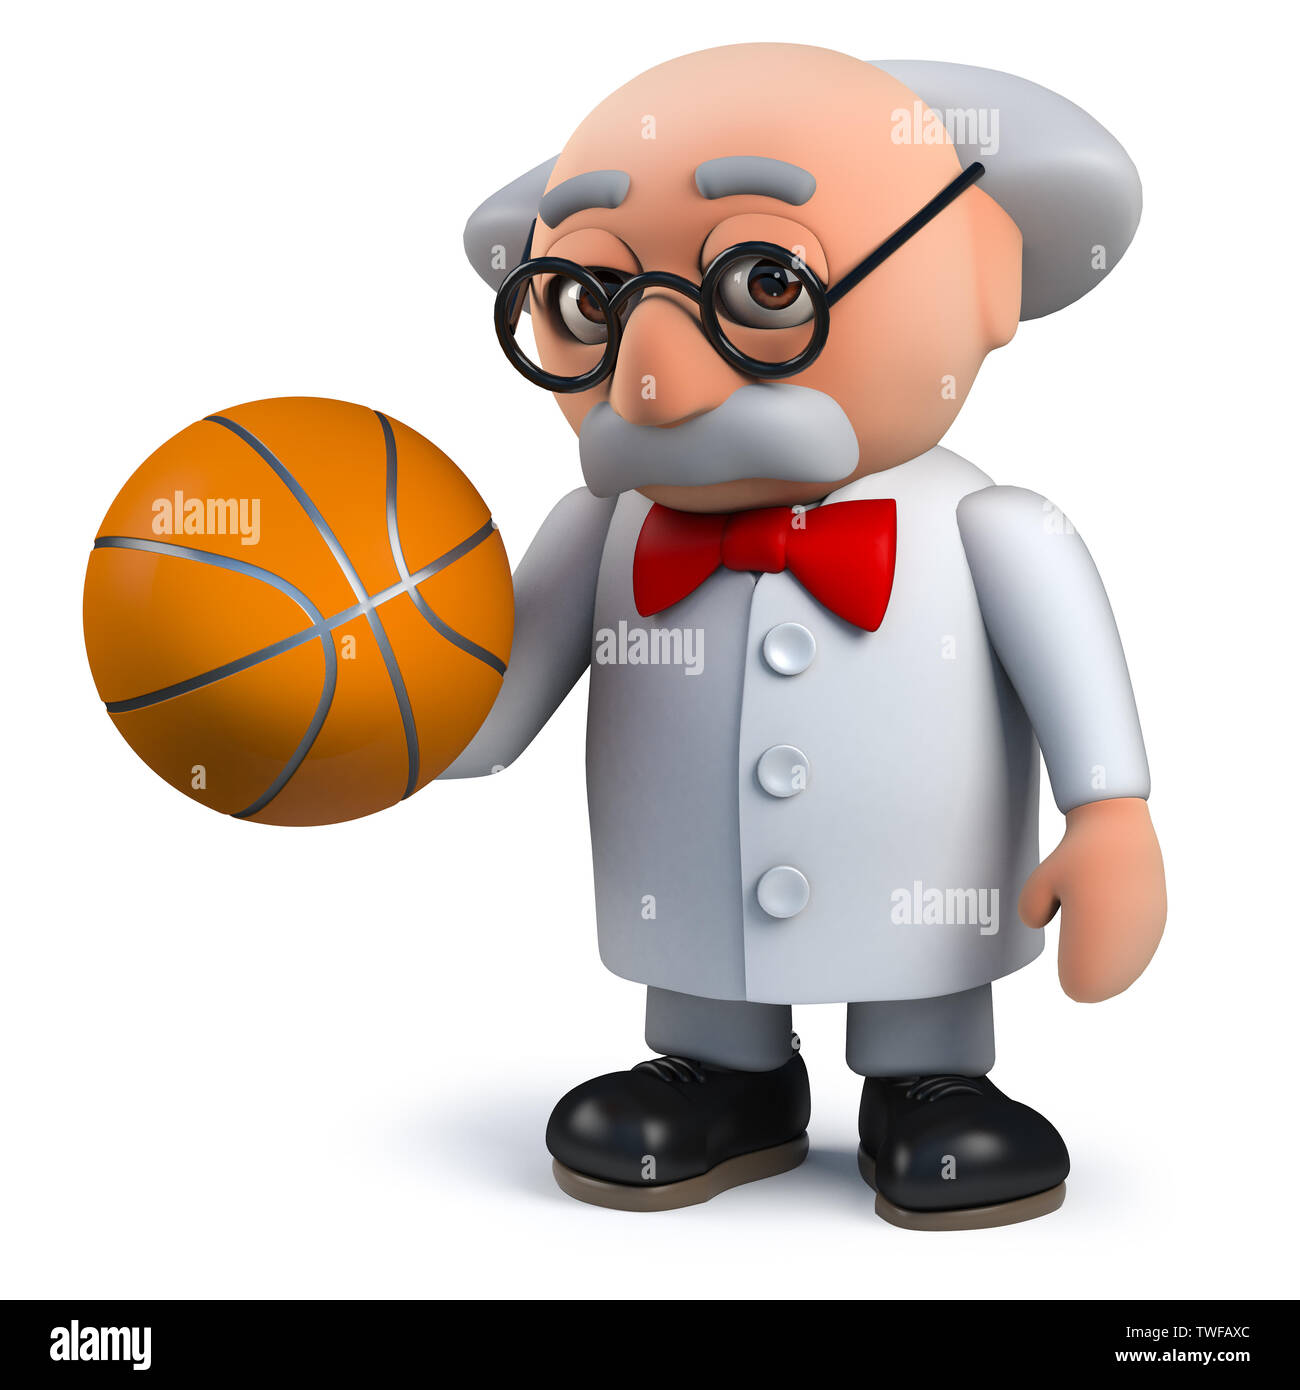 Rendered image in 3d of a mad scientist professor character holding a basketball in 3d Stock Photo